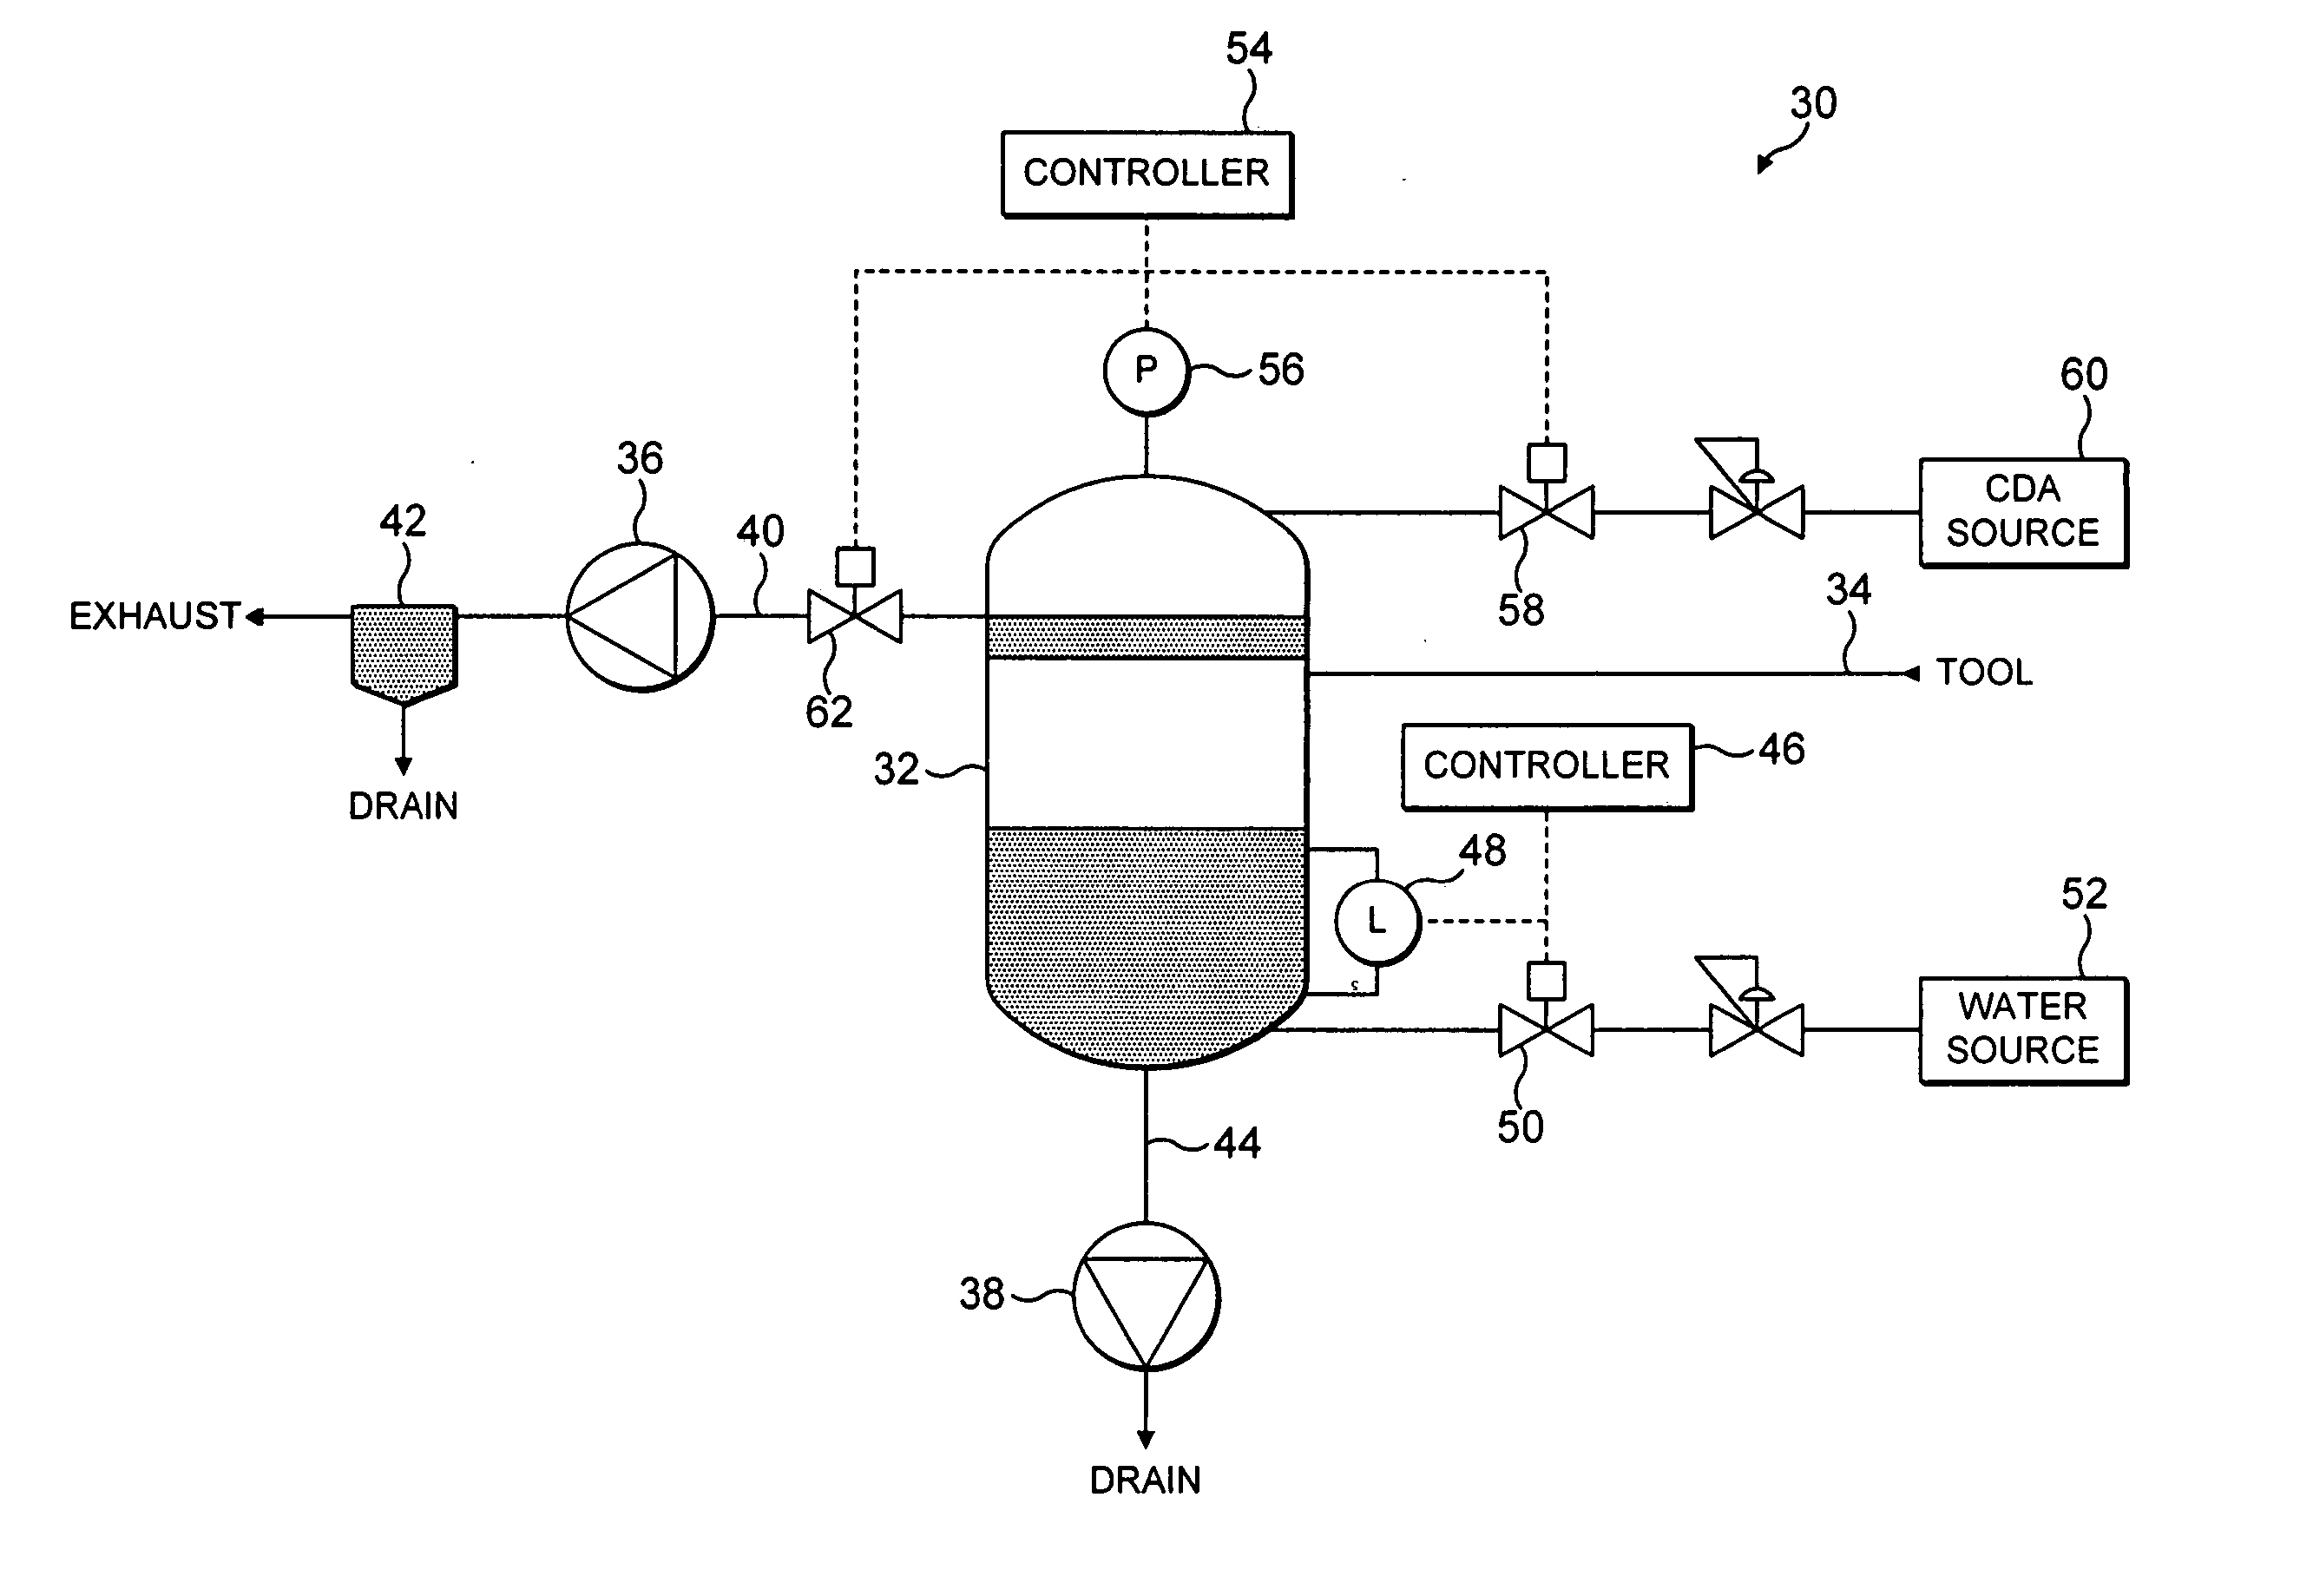 Vacuum system for immersion photolithography